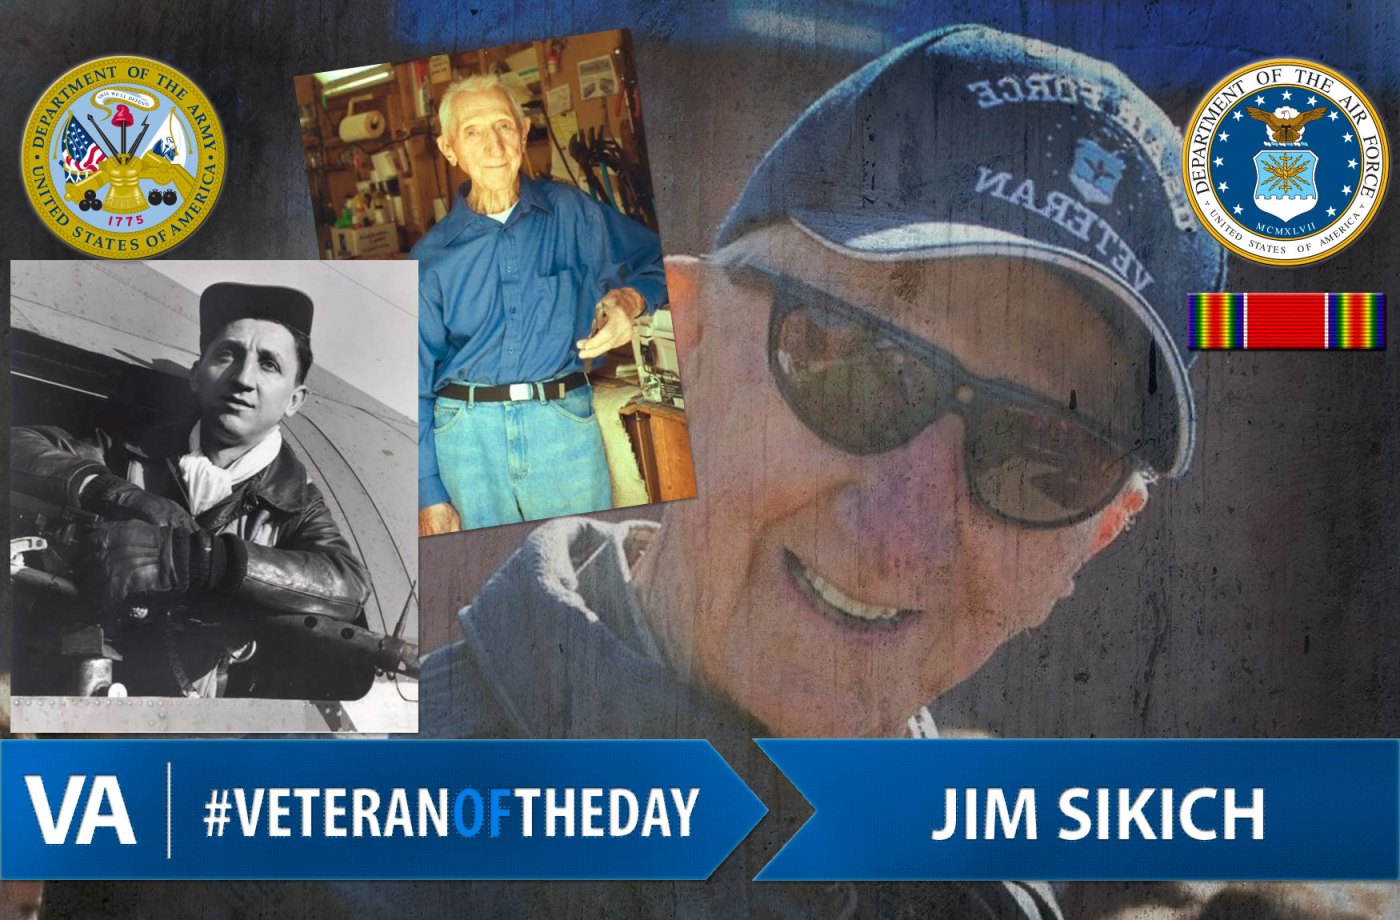 Veteran of the day Jim Sikich